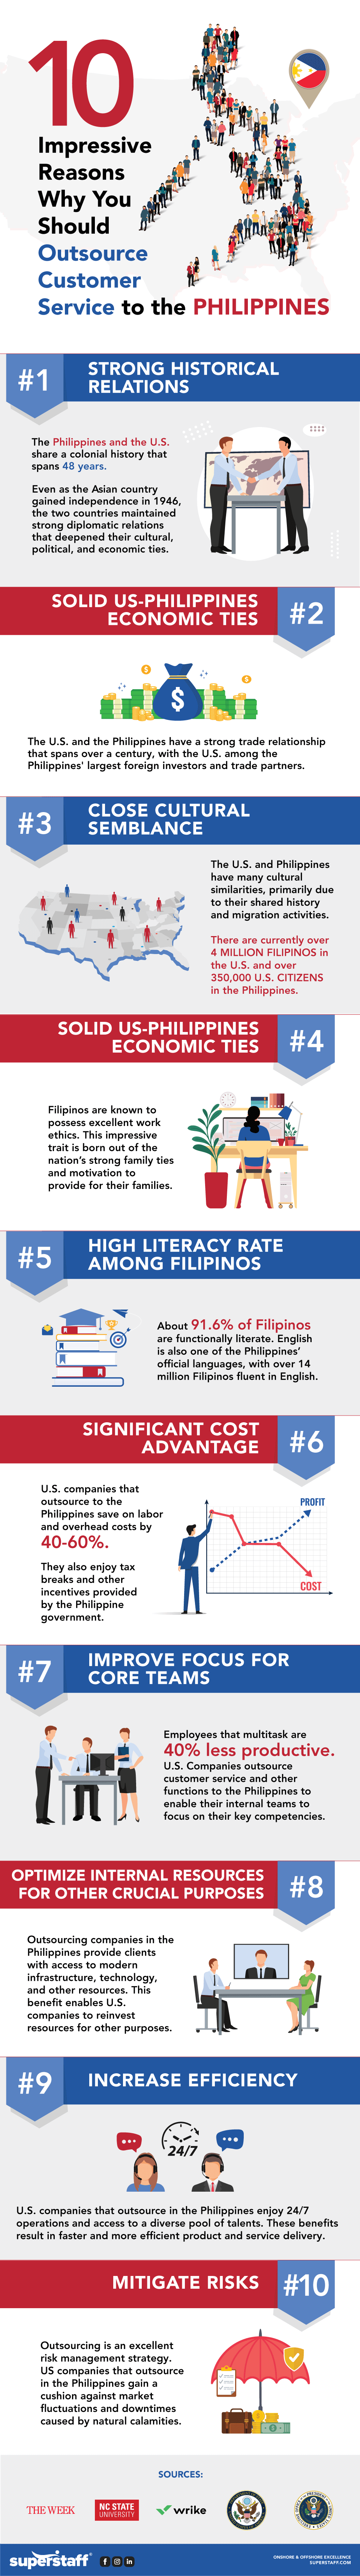 10 Reasons Why US Companies Outsource Customer Service to the Philippines